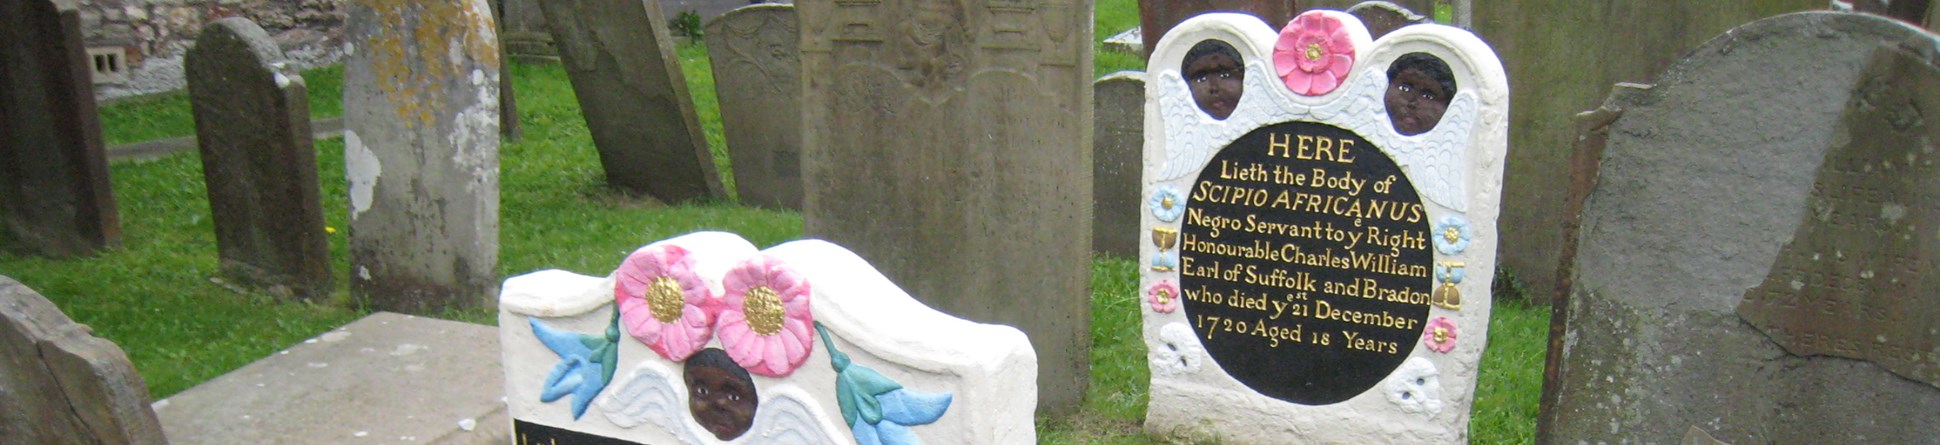 Headstone and footstone, with shaped tops. The freshly painted memorial stands out amongst unpainted stones. Carving includes winged Black cherubs, and flowers. The headstone carries the details of the subject’s life; the footstone carries a verse.